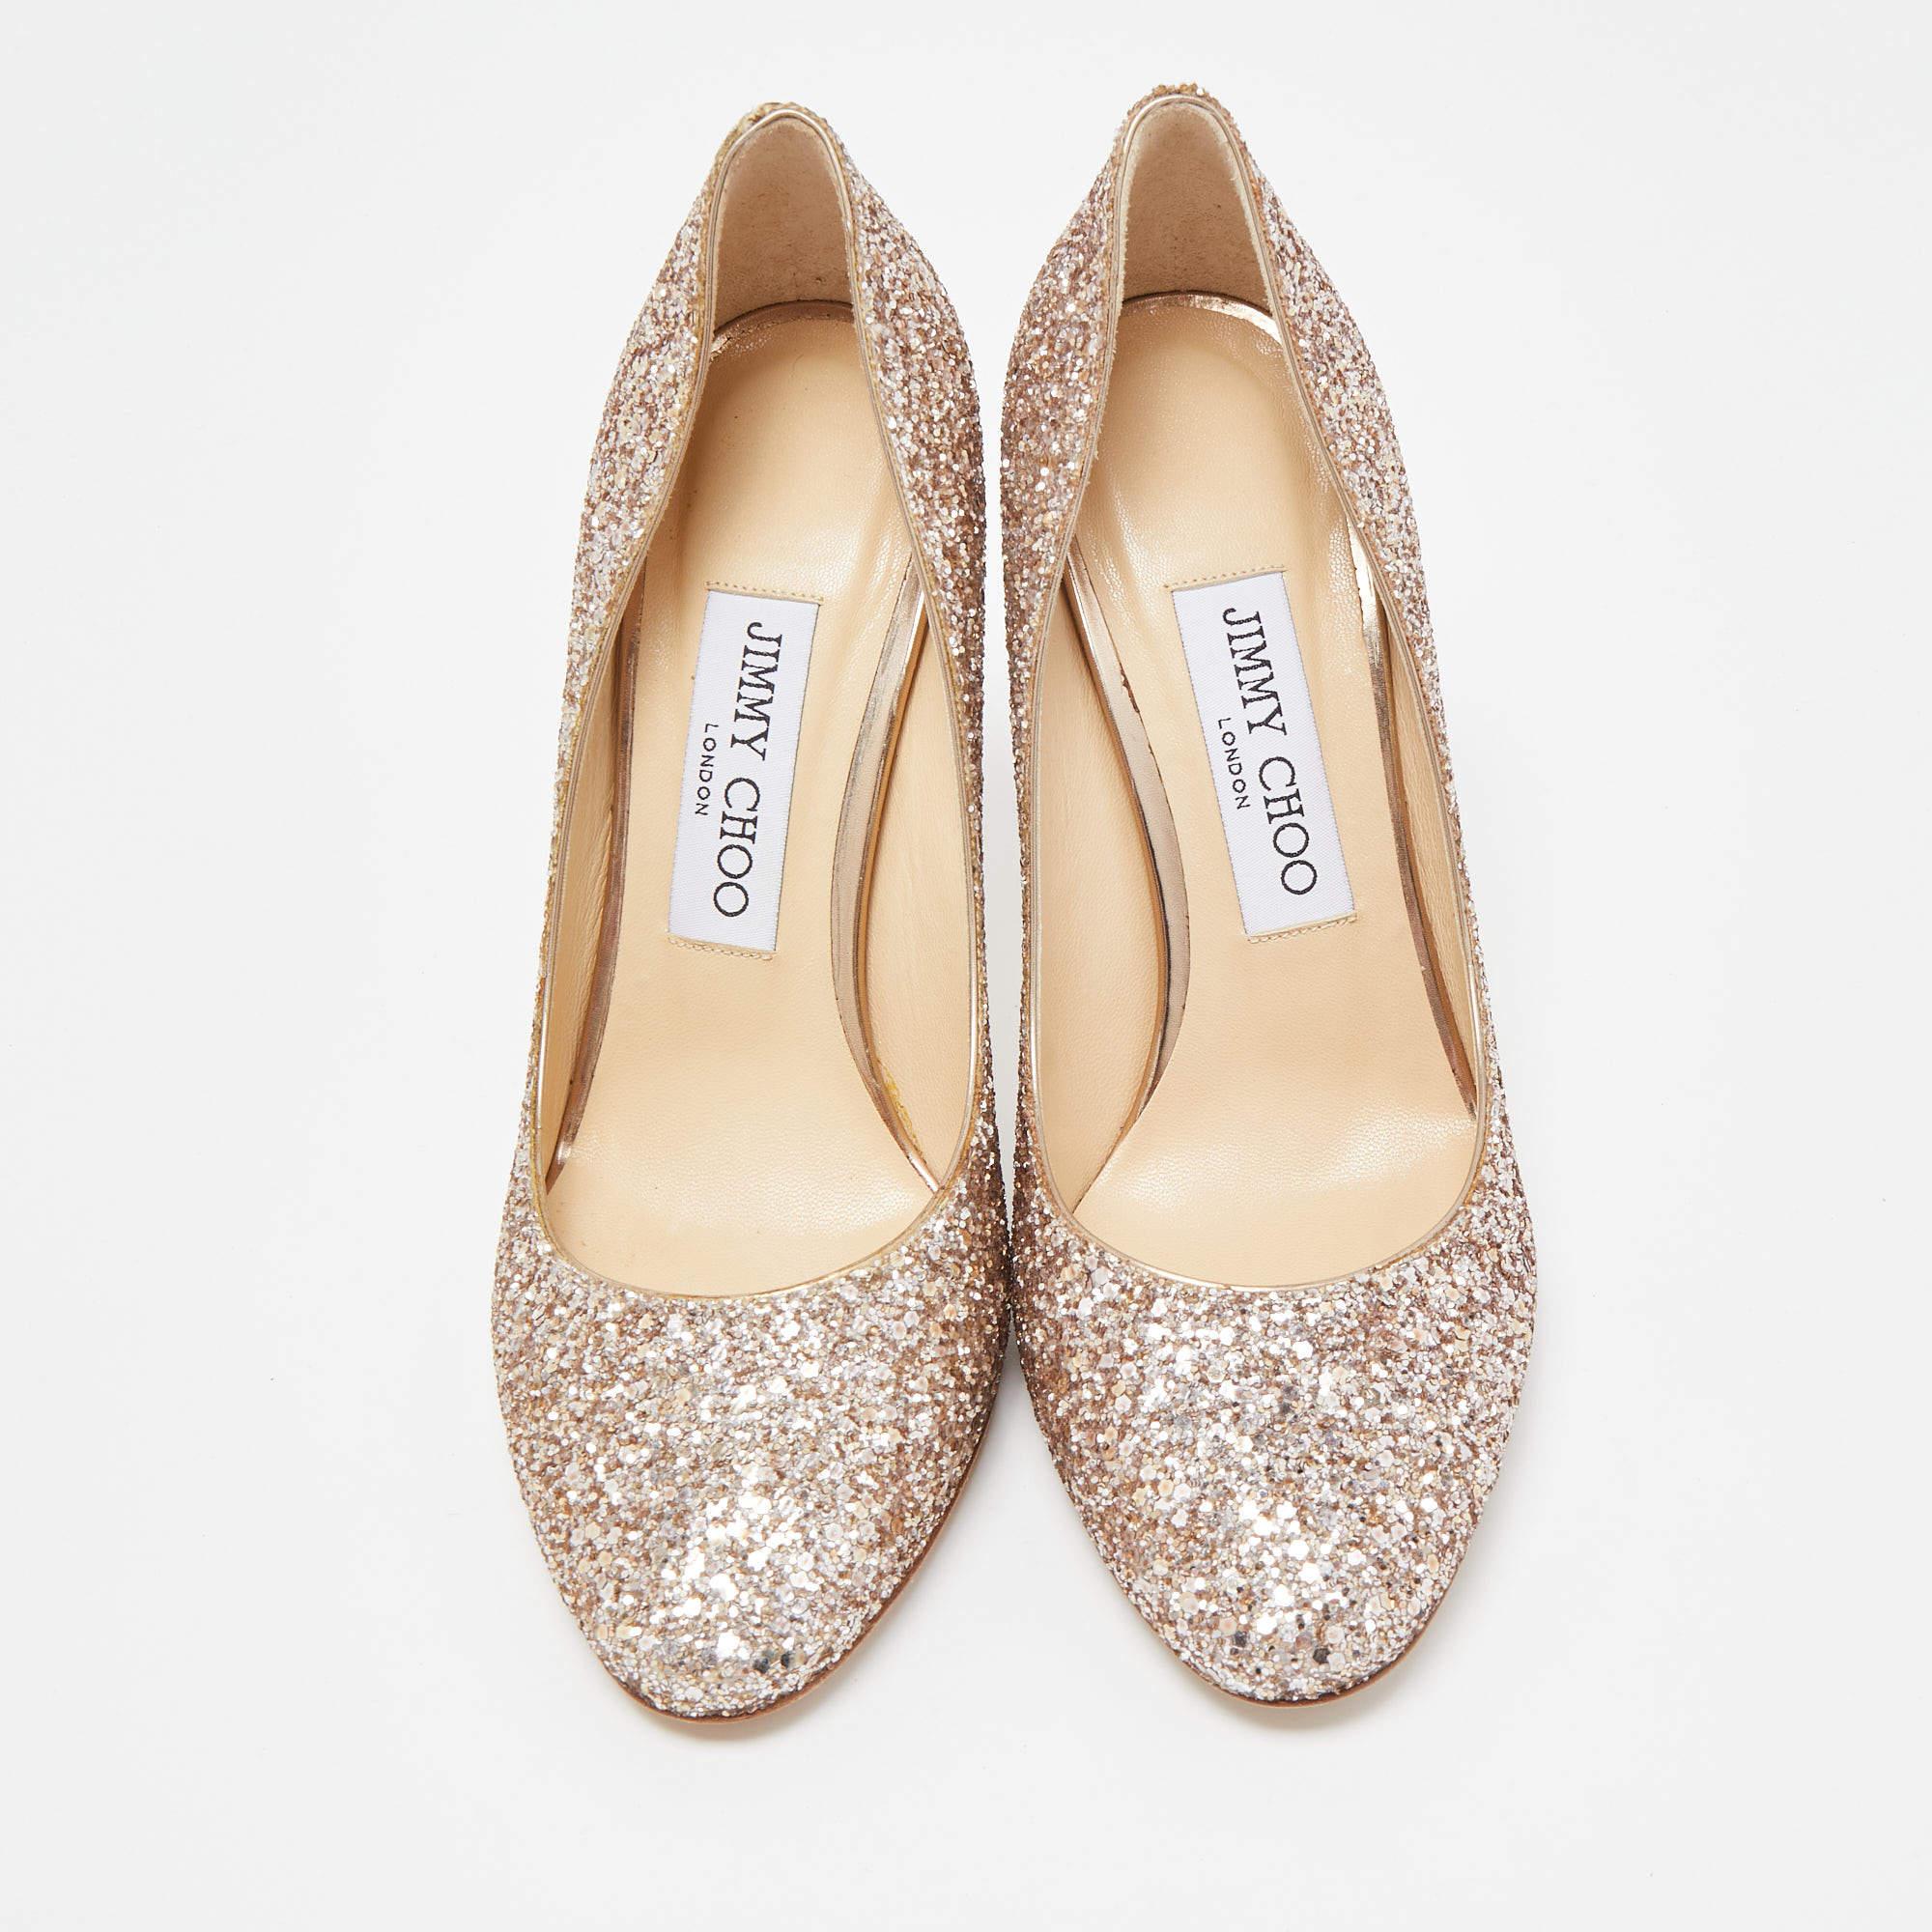 Jimmy Choo never fails to impress with its elegant designs, and this pair of Romy pumps is a fine example. Made from glitter, it will lend you a stellar style statement, and its 10cm heels will add grace to your every step.

Includes: Original Box

